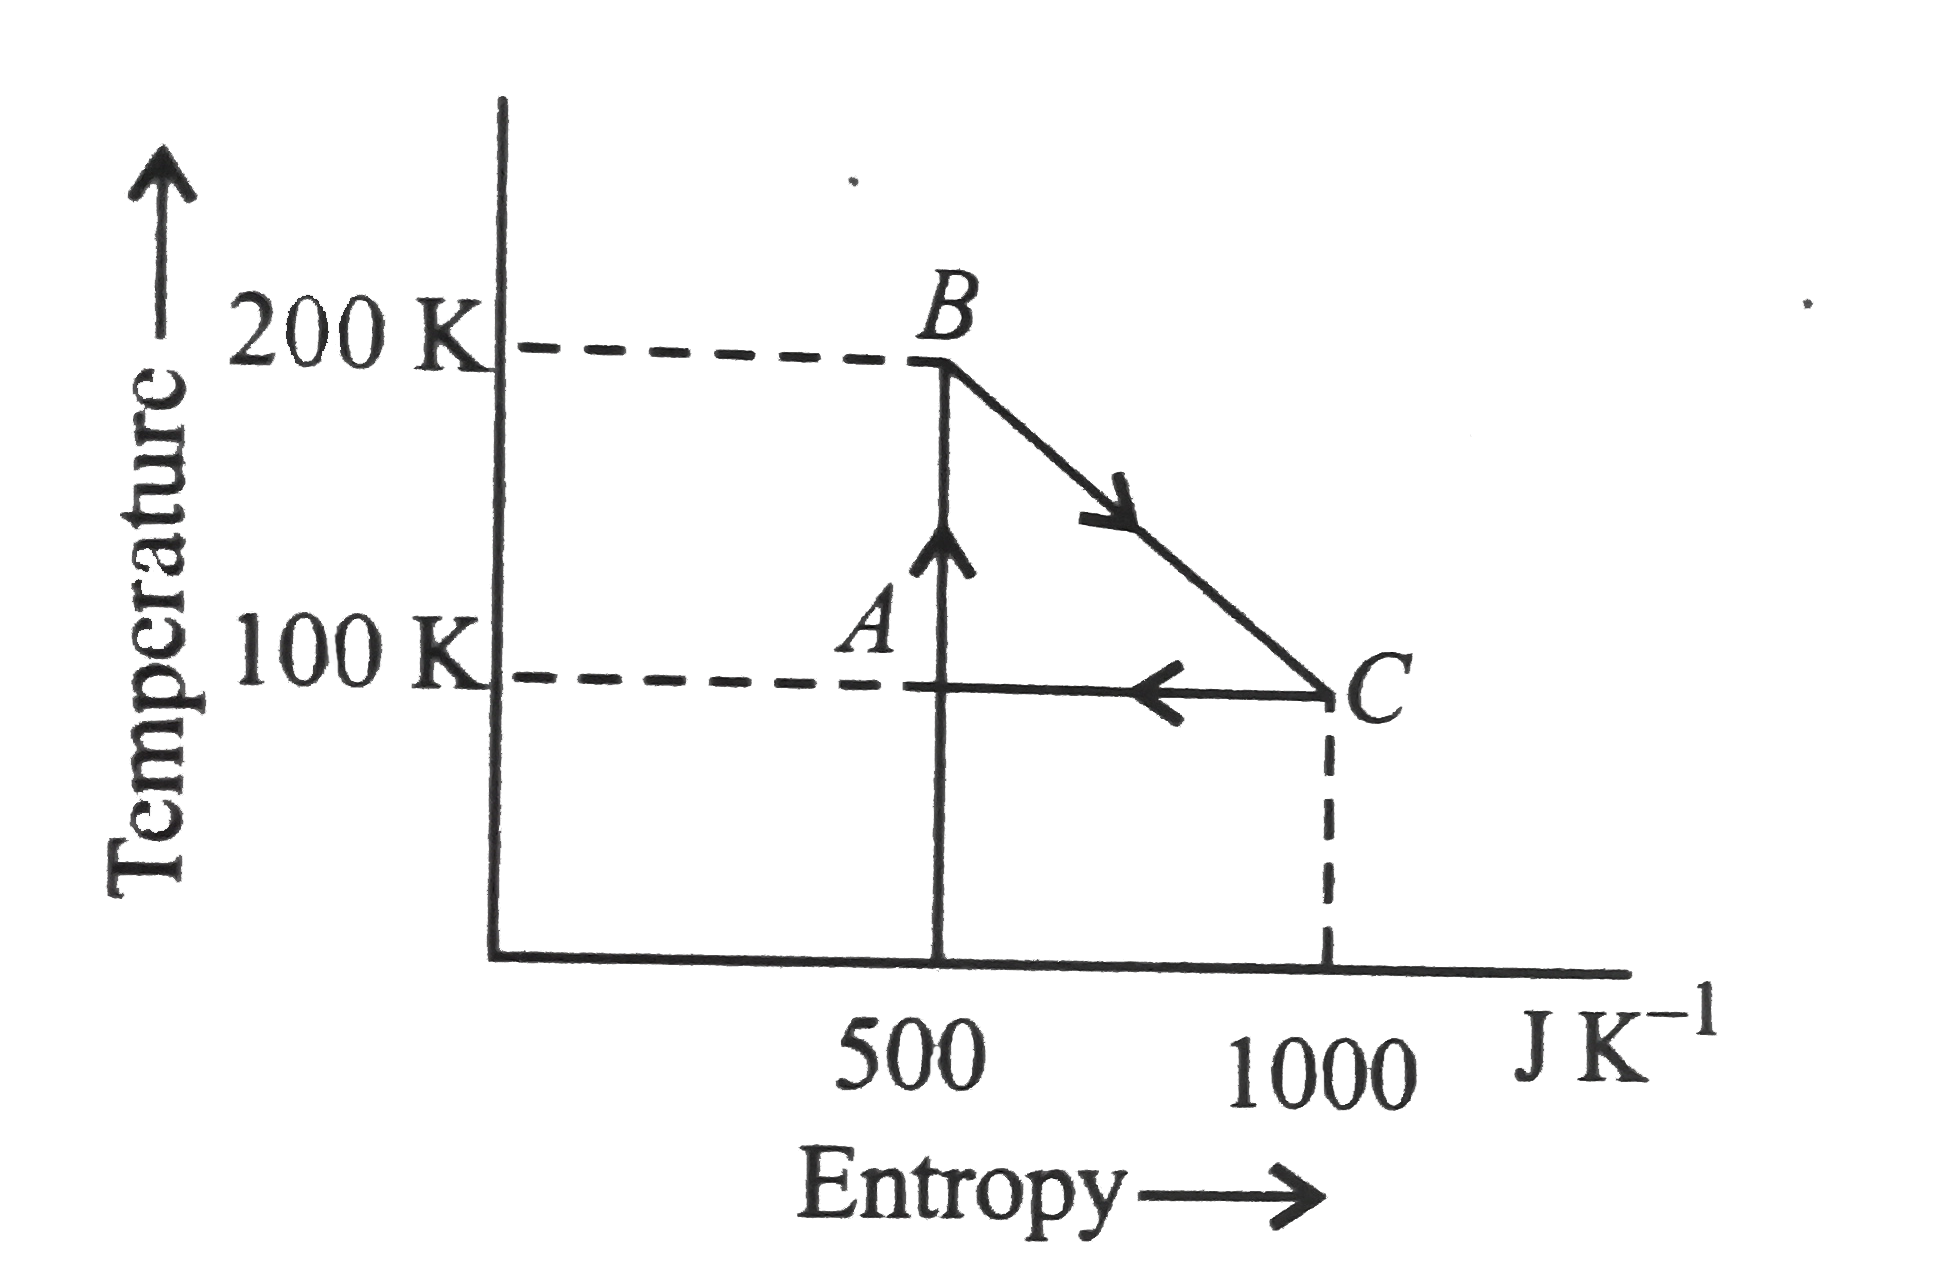 The efficiency of the reversible cycle shown in the given figure is